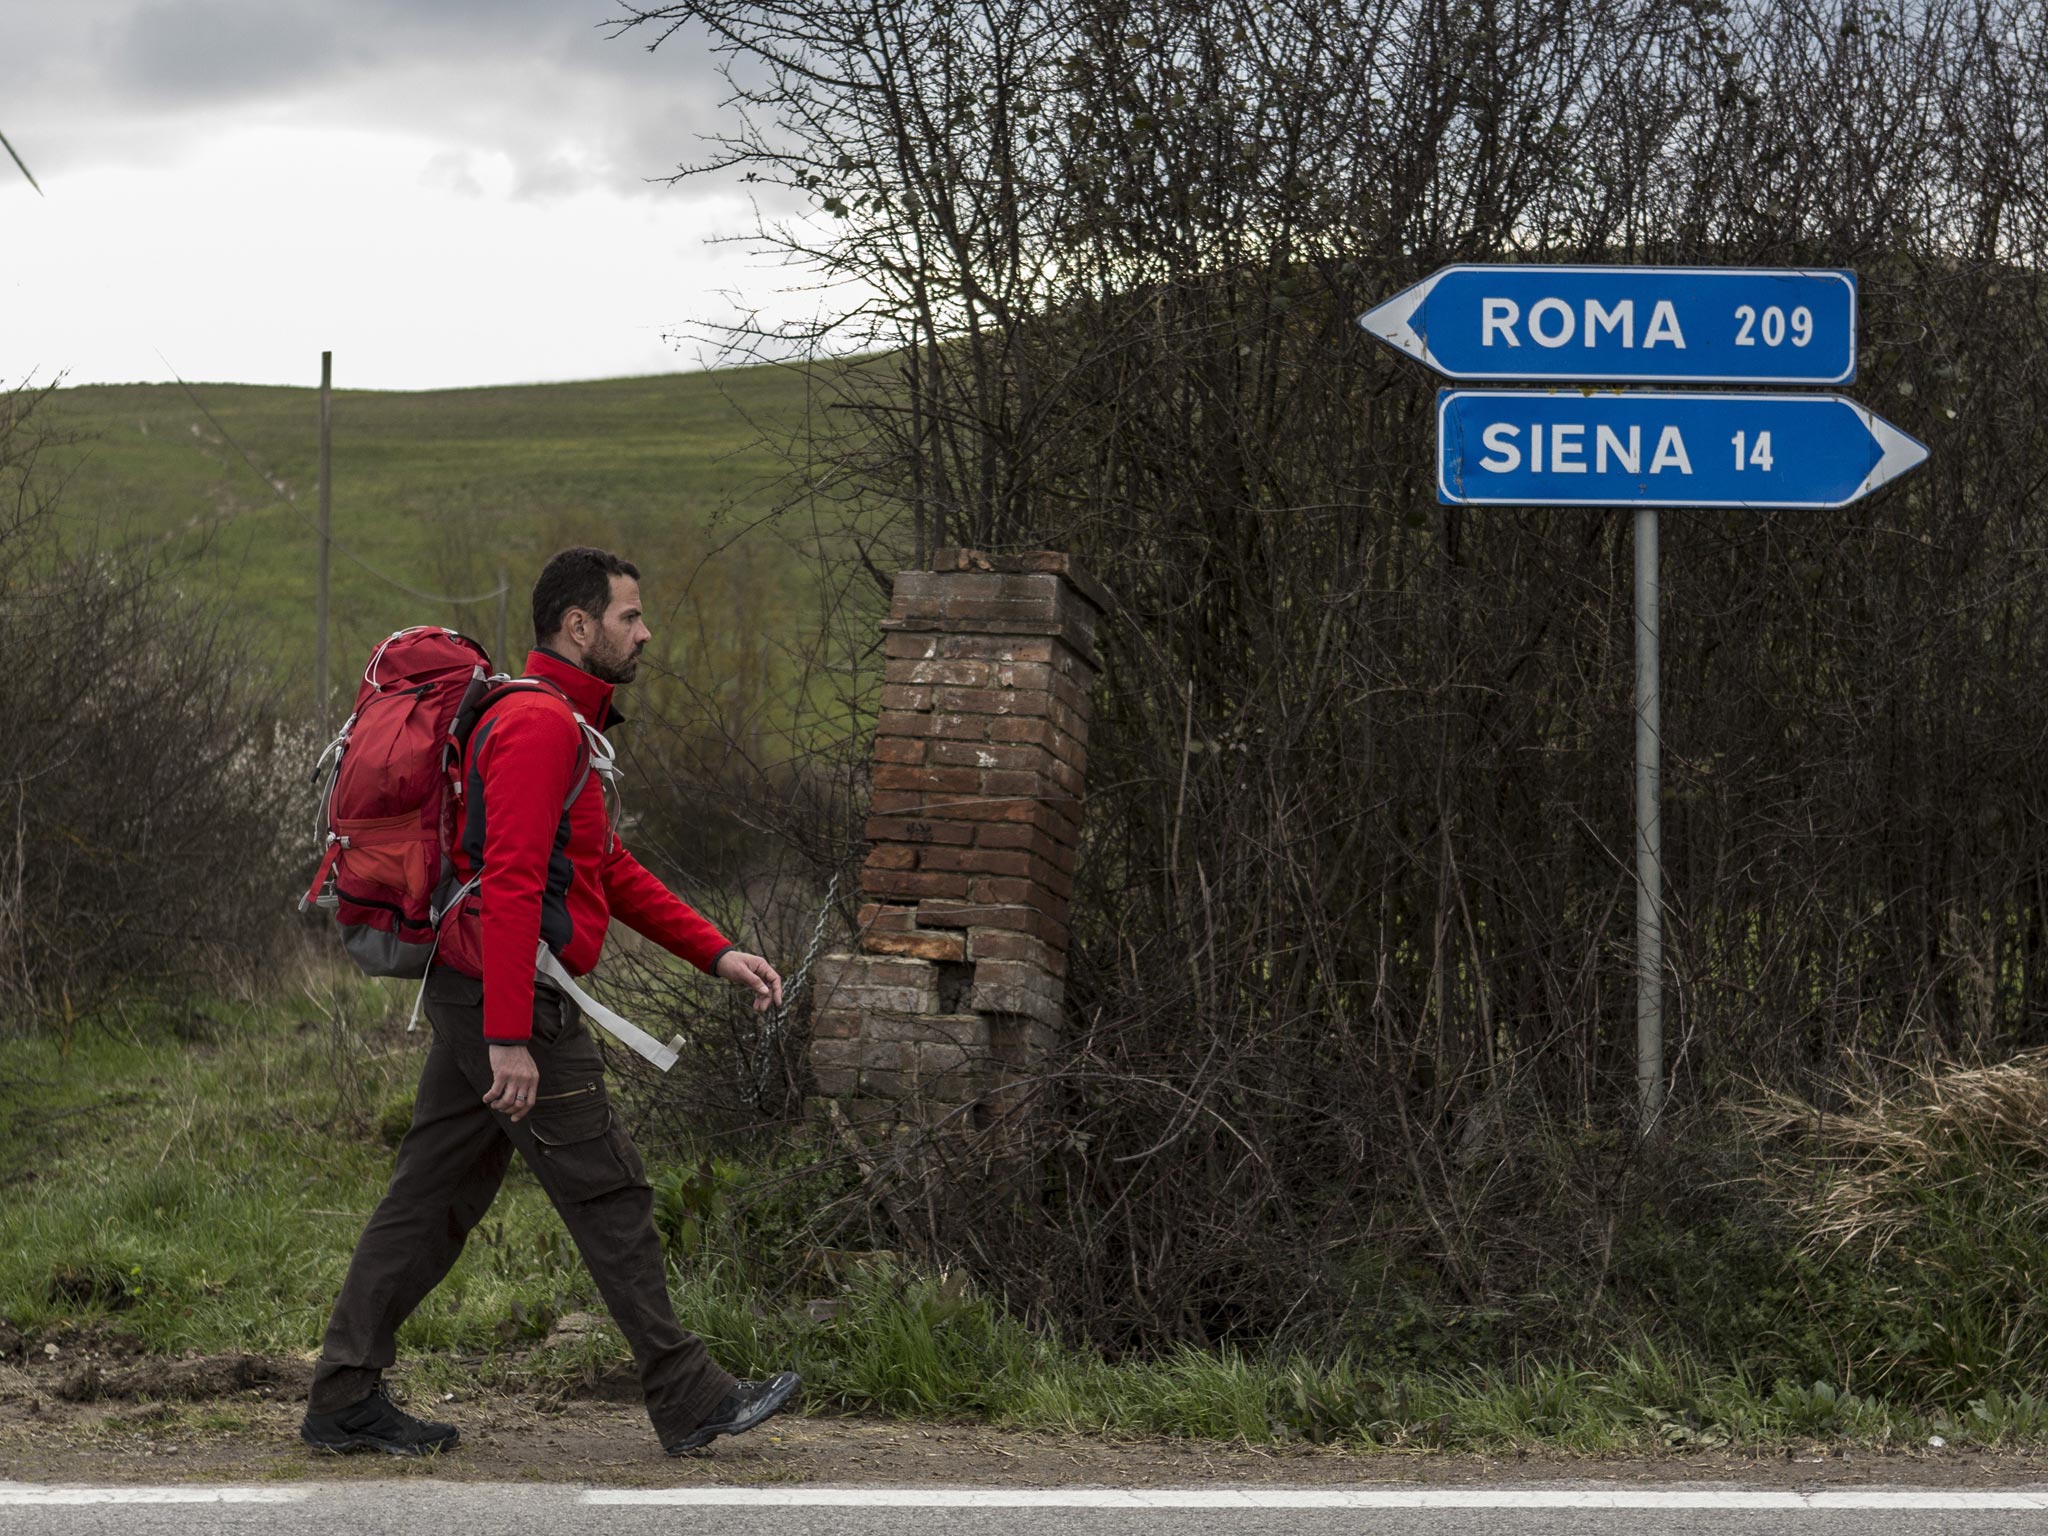 The rogue trader Jérôme Kerviel on his long walk back to Paris from Rome after meeting Pope Francis